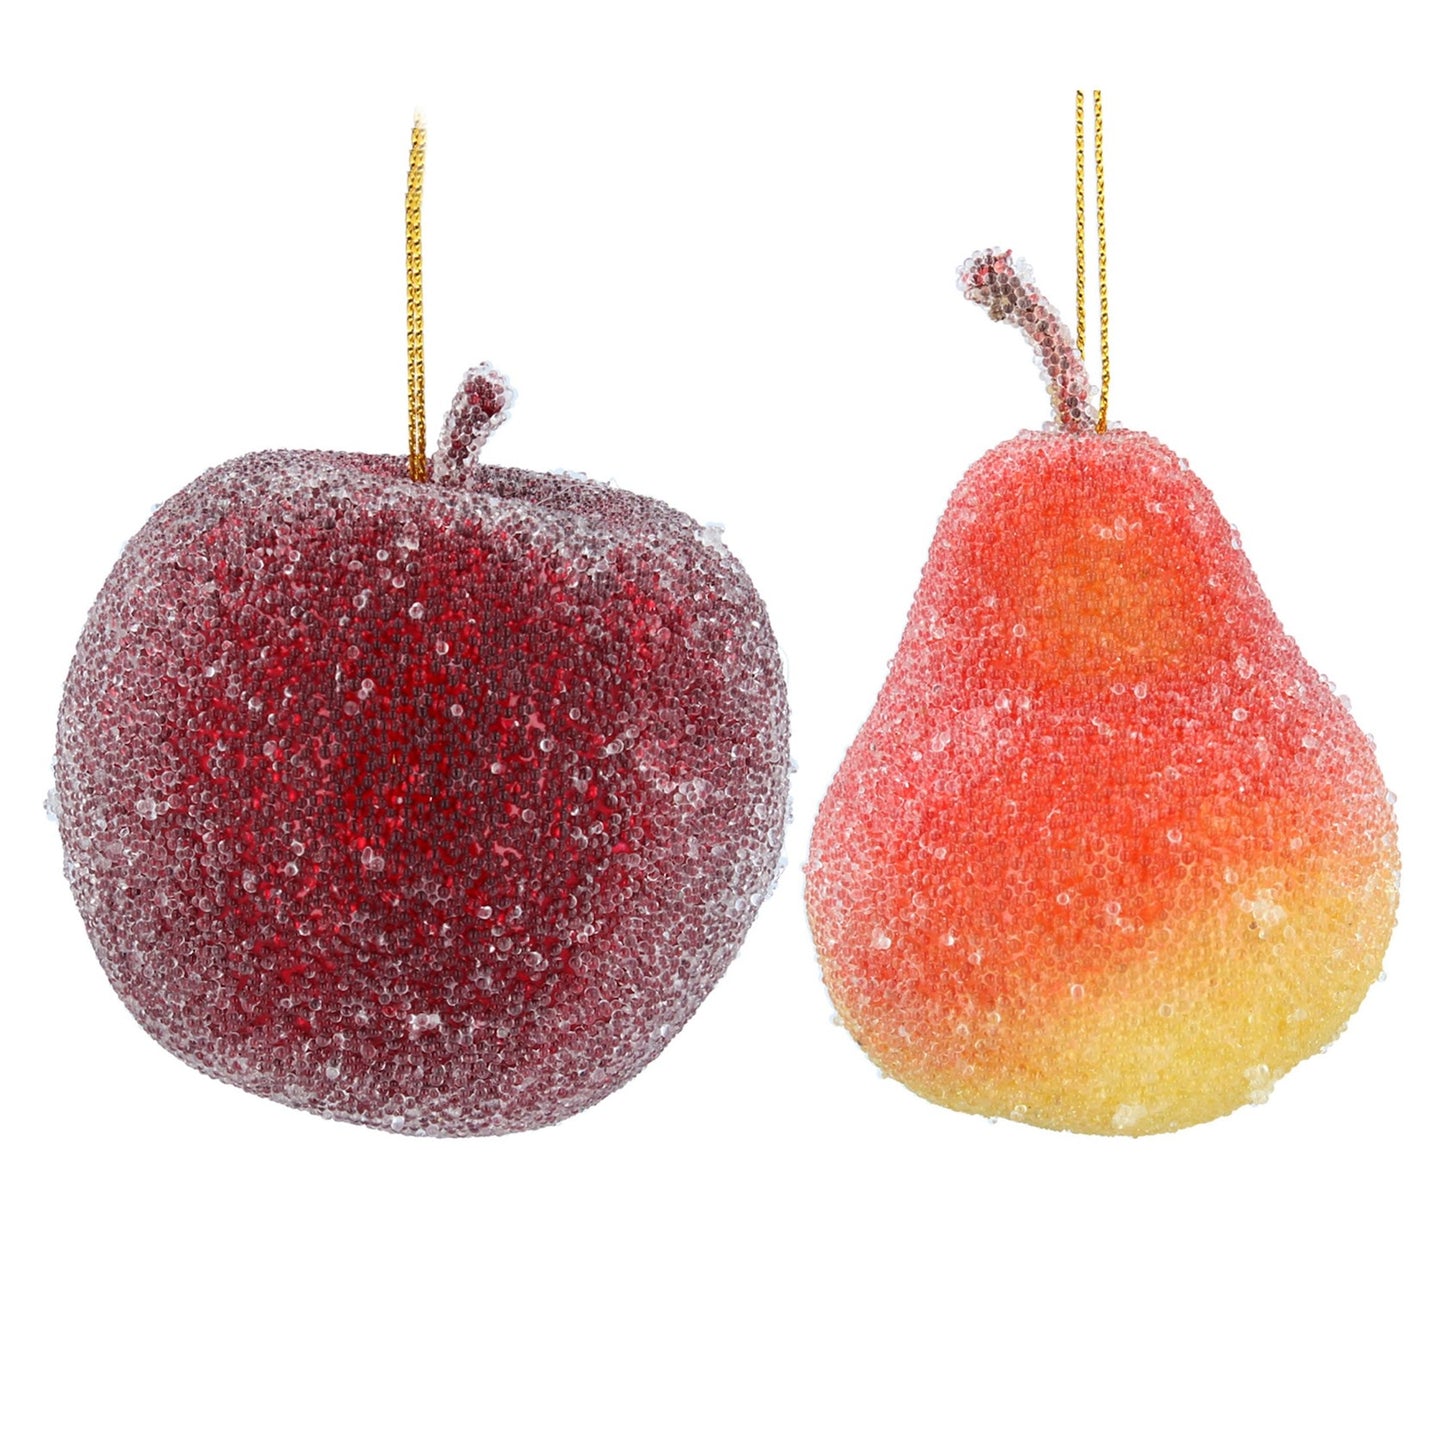 Frosted Apple and Pear Hanging Decorations